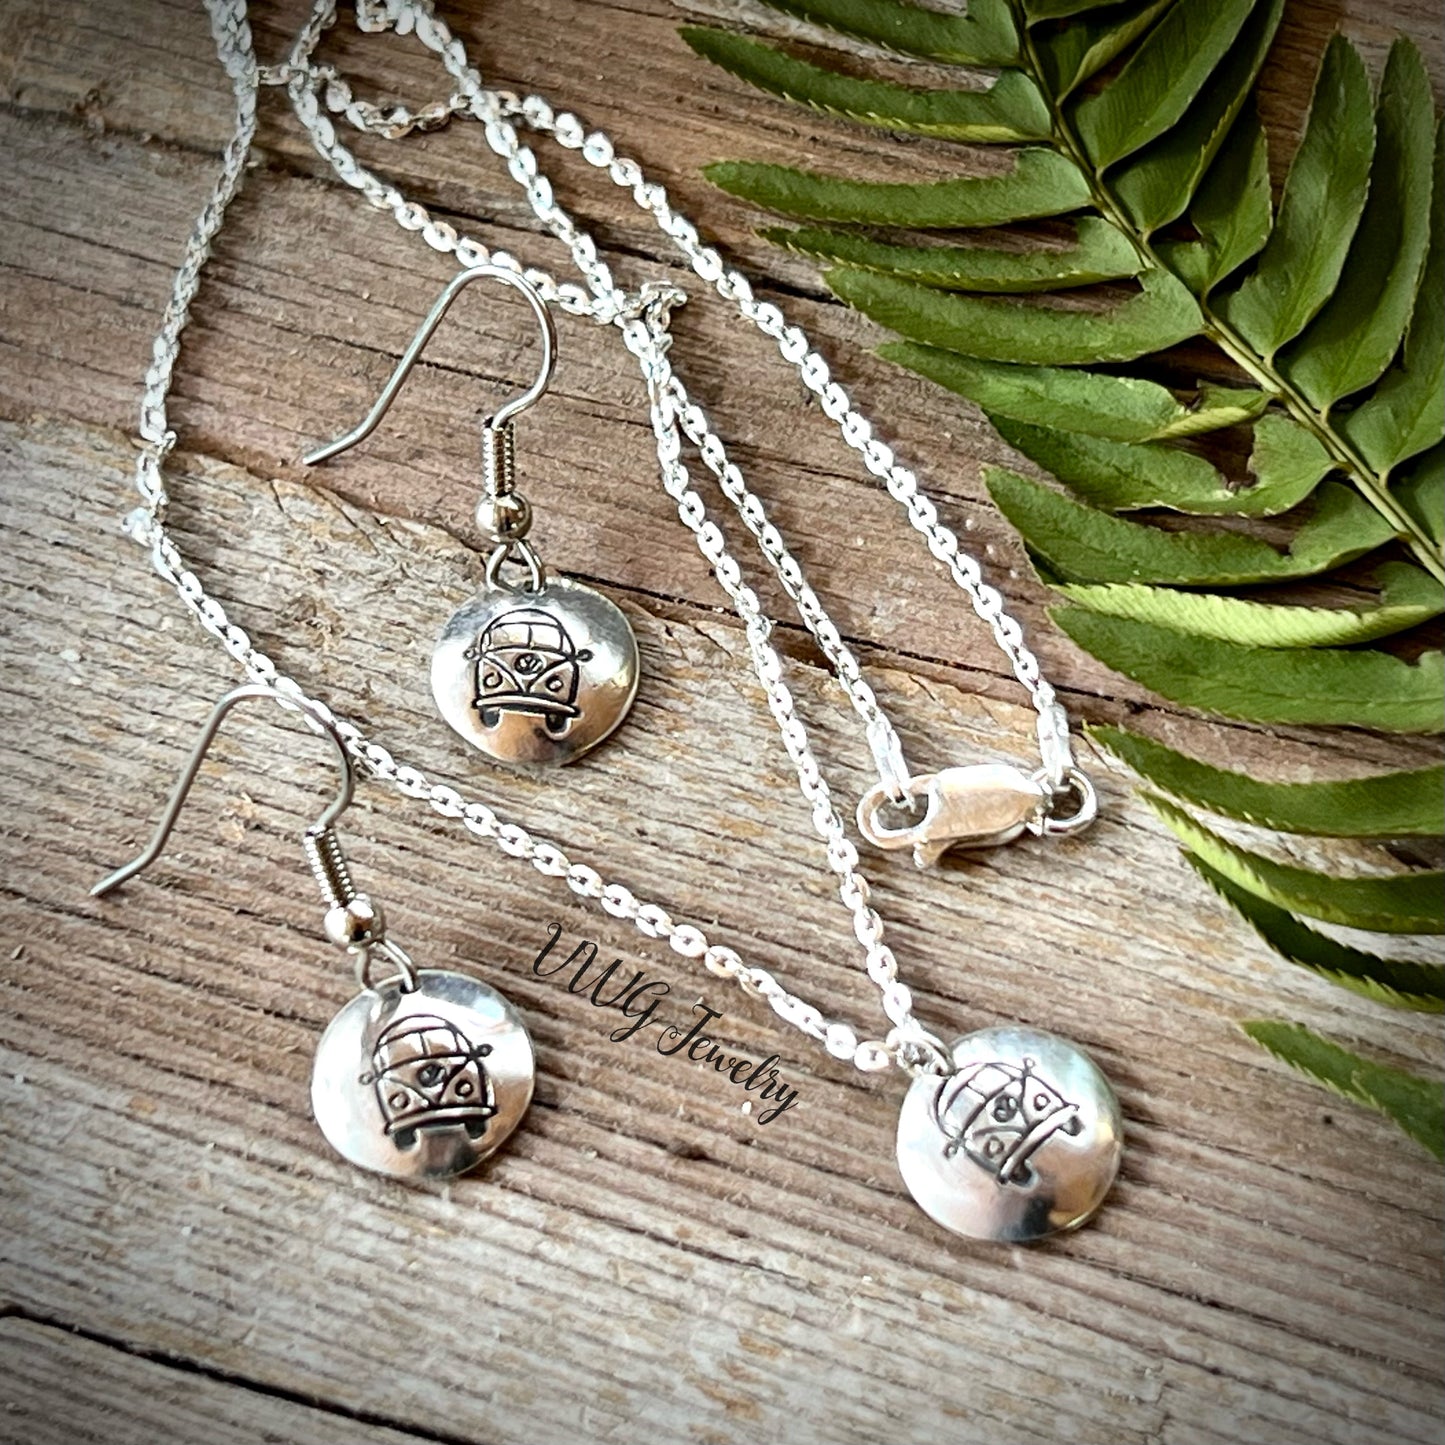 Hippy Love Bus Sterling Silver Hand Stamped Earrings